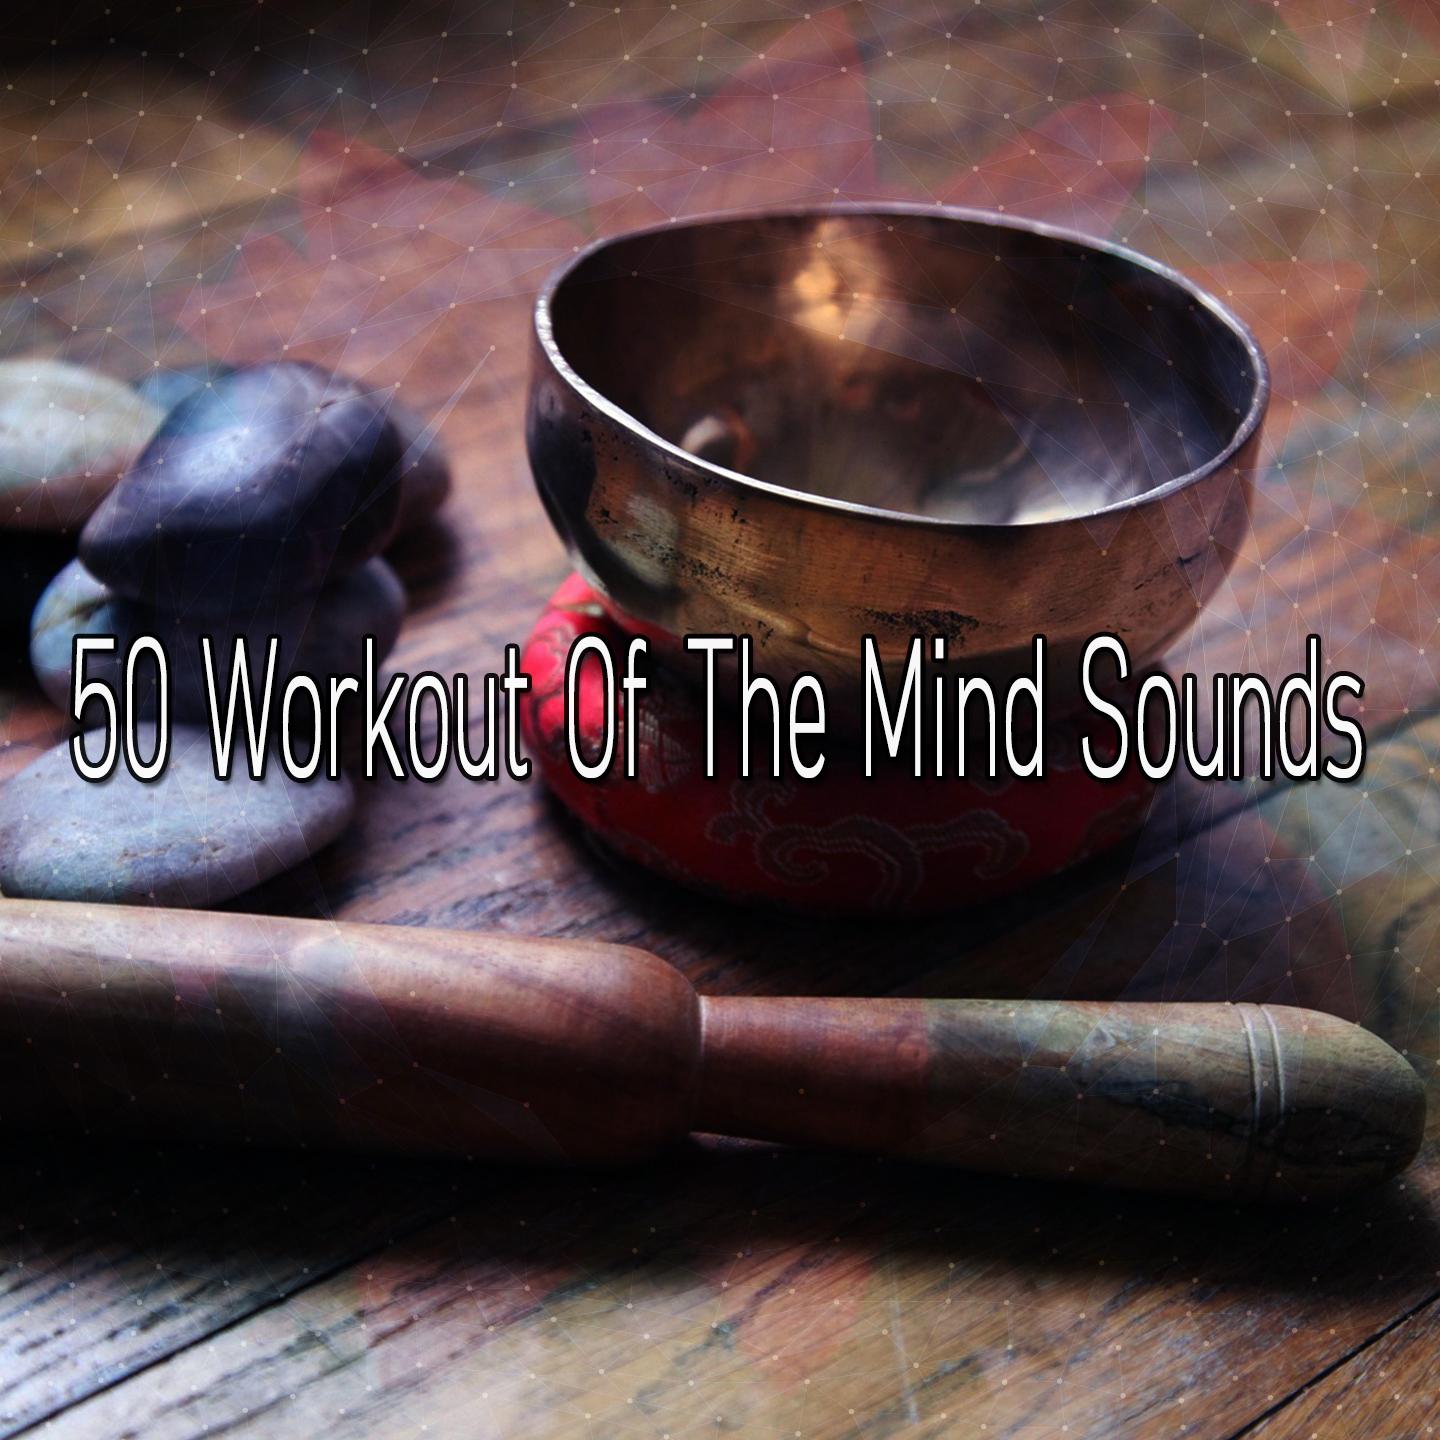 50 Workout Of The Mind Sounds